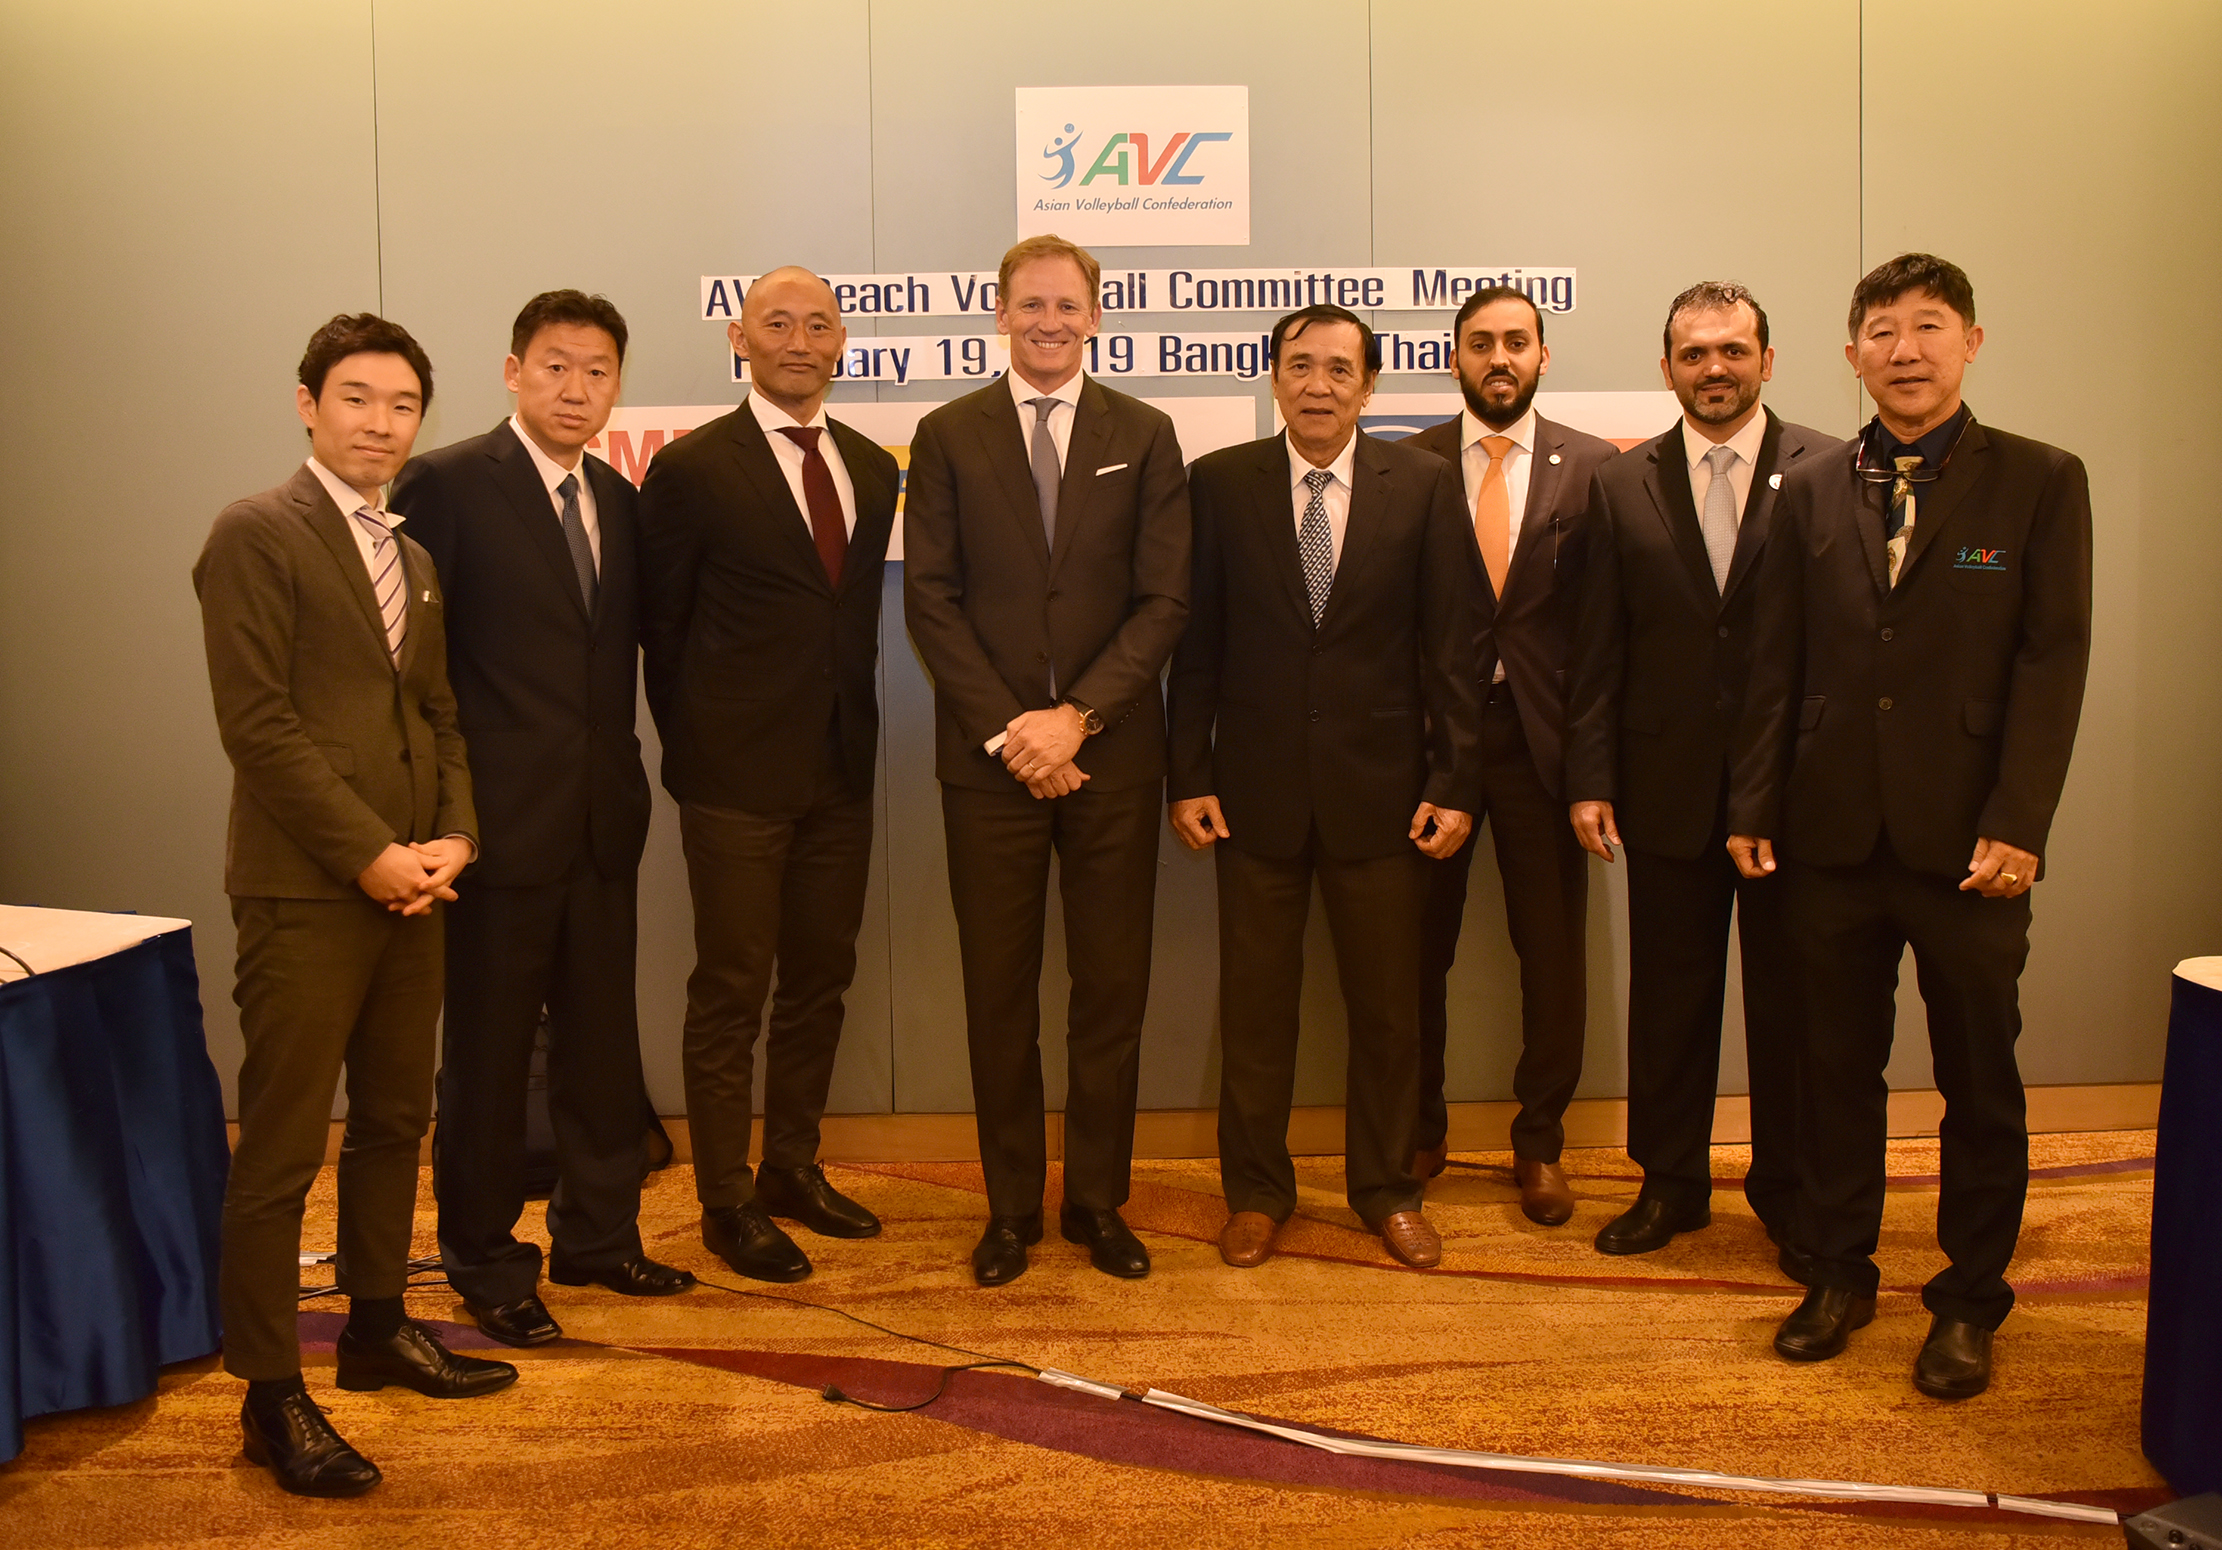 FUTURE ASIAN TOUR EVENTS A KEY TOPIC DISCUSSED AT AVC BEACH VOLLEYBALL COMMITTEE MEETING